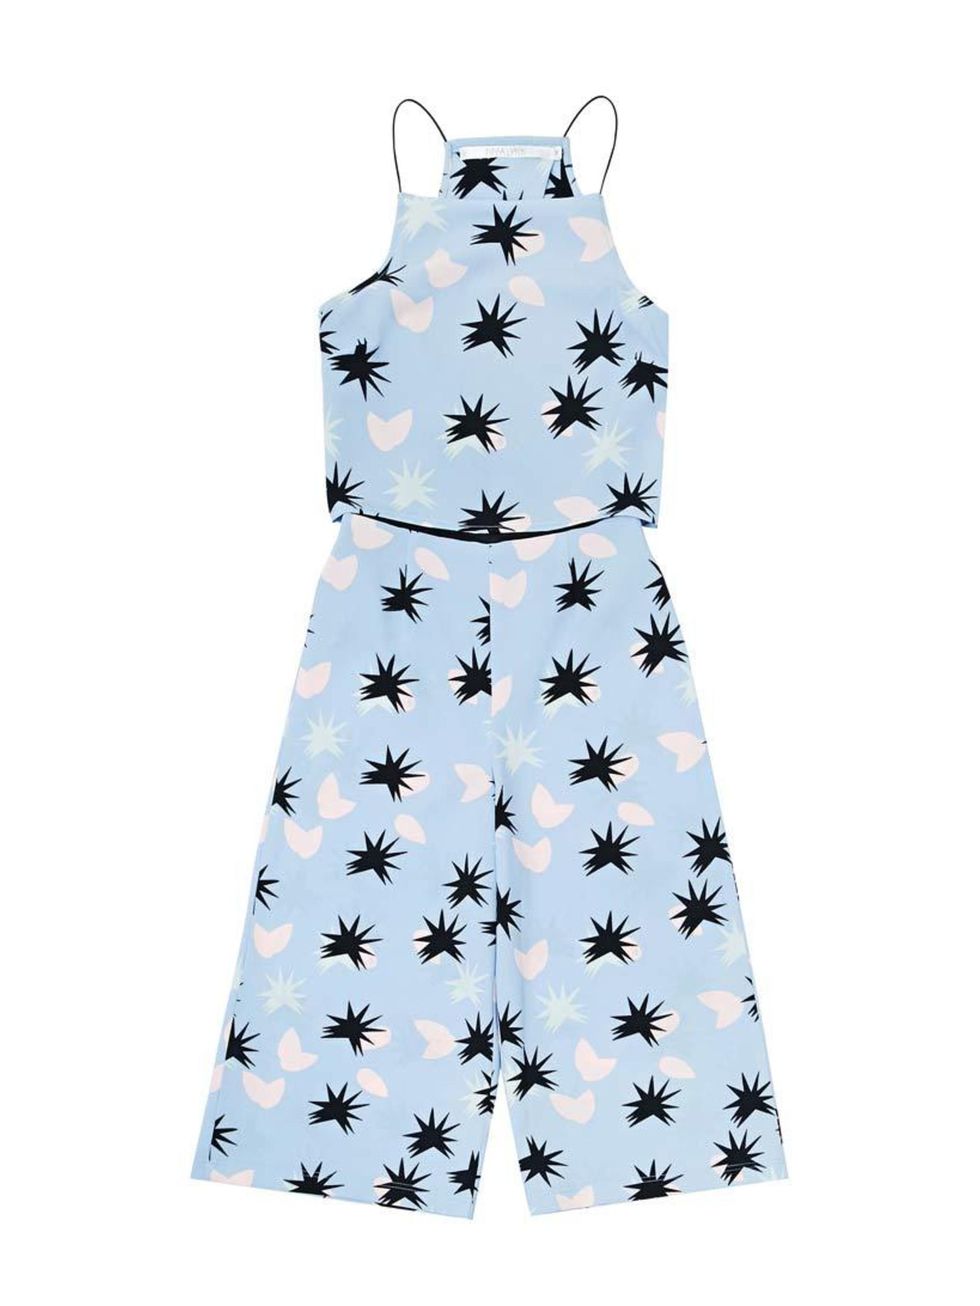 <p><span style="line-height:1.6">The jumpsuit obsession continues... Art Intern Camille Lapham-Flores was first in line for this printed version.</span></p>

<p><span style="line-height:1.6">Pippa Lynn jumpsuit, £68 at <a href="http://www.urbanoutfitters.